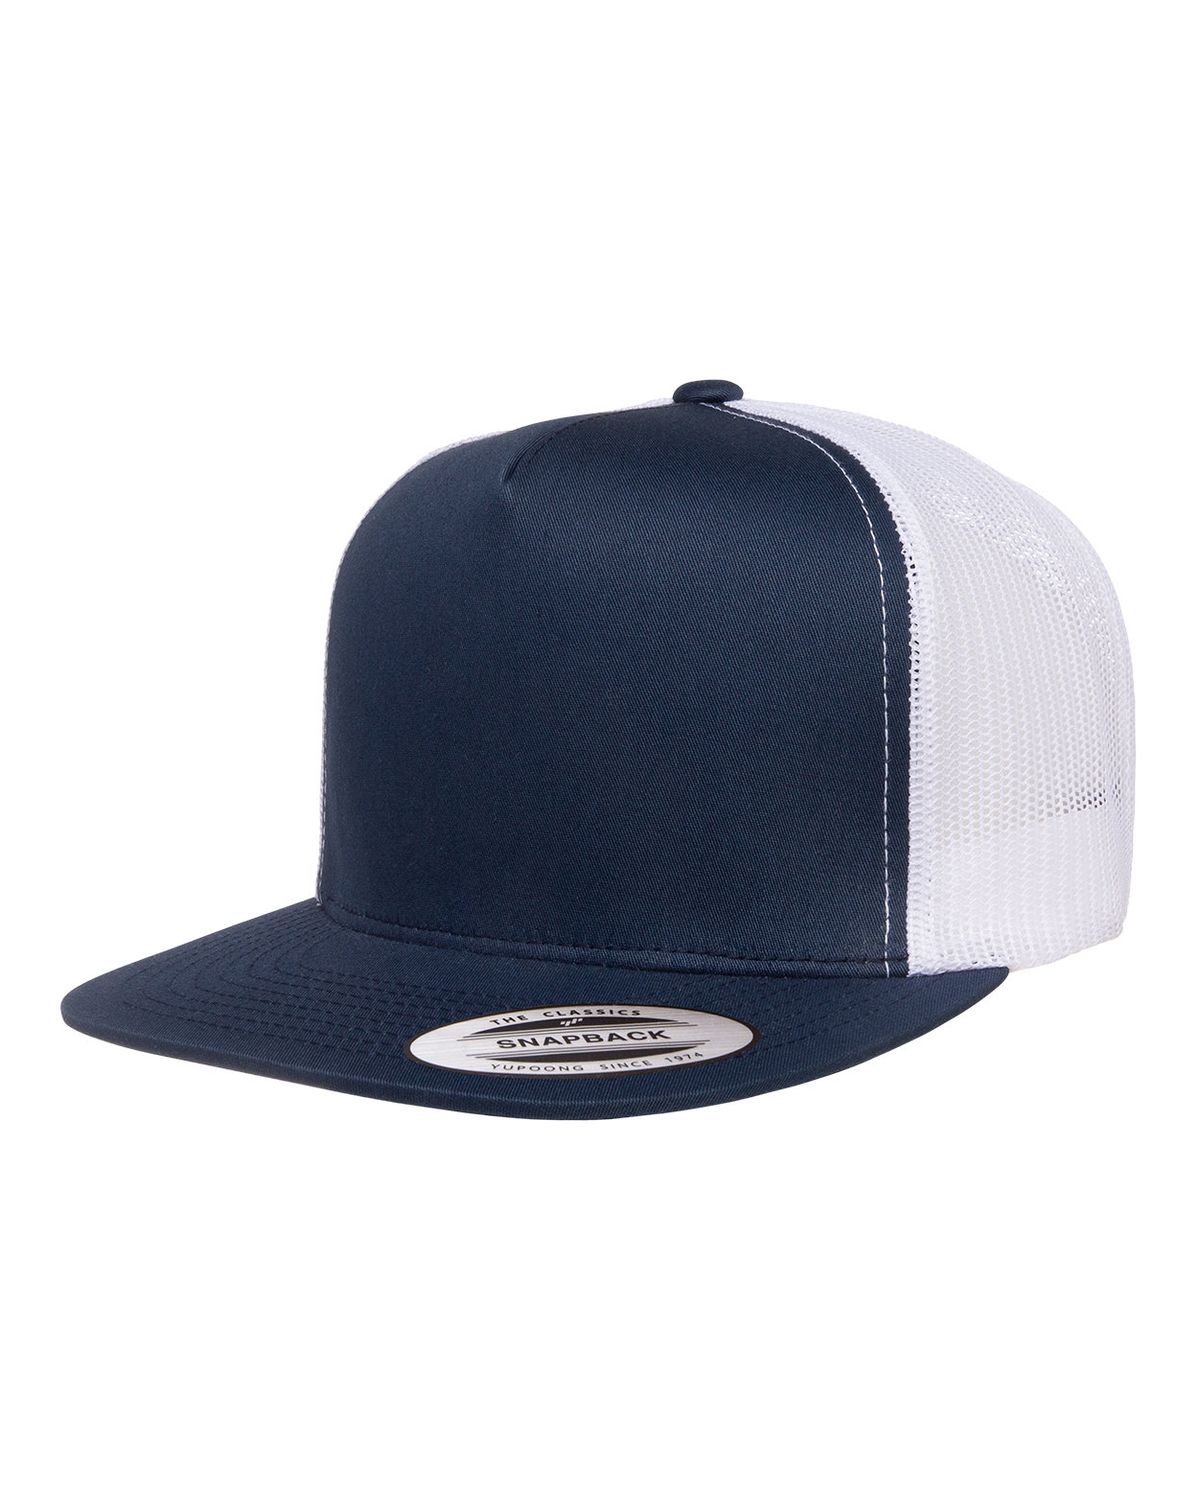 6006 Yupoong Cheap Trucker Classic Available Cap at Price